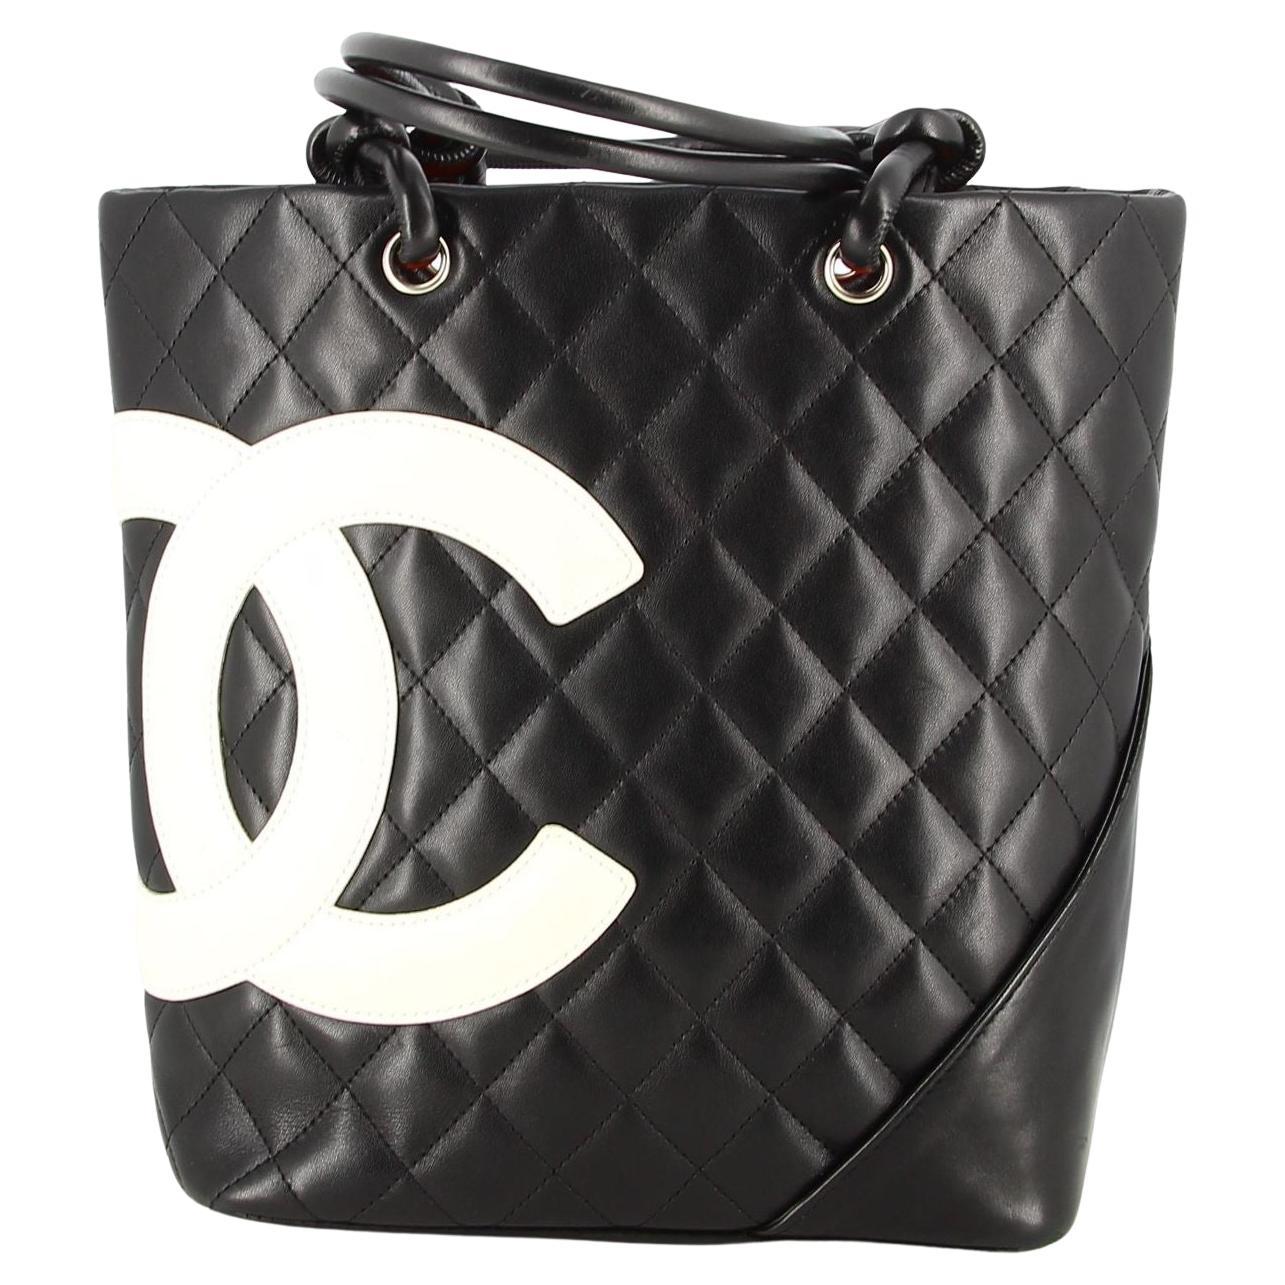 White Chanel Bags With Black C - For Sale on 1stDibs